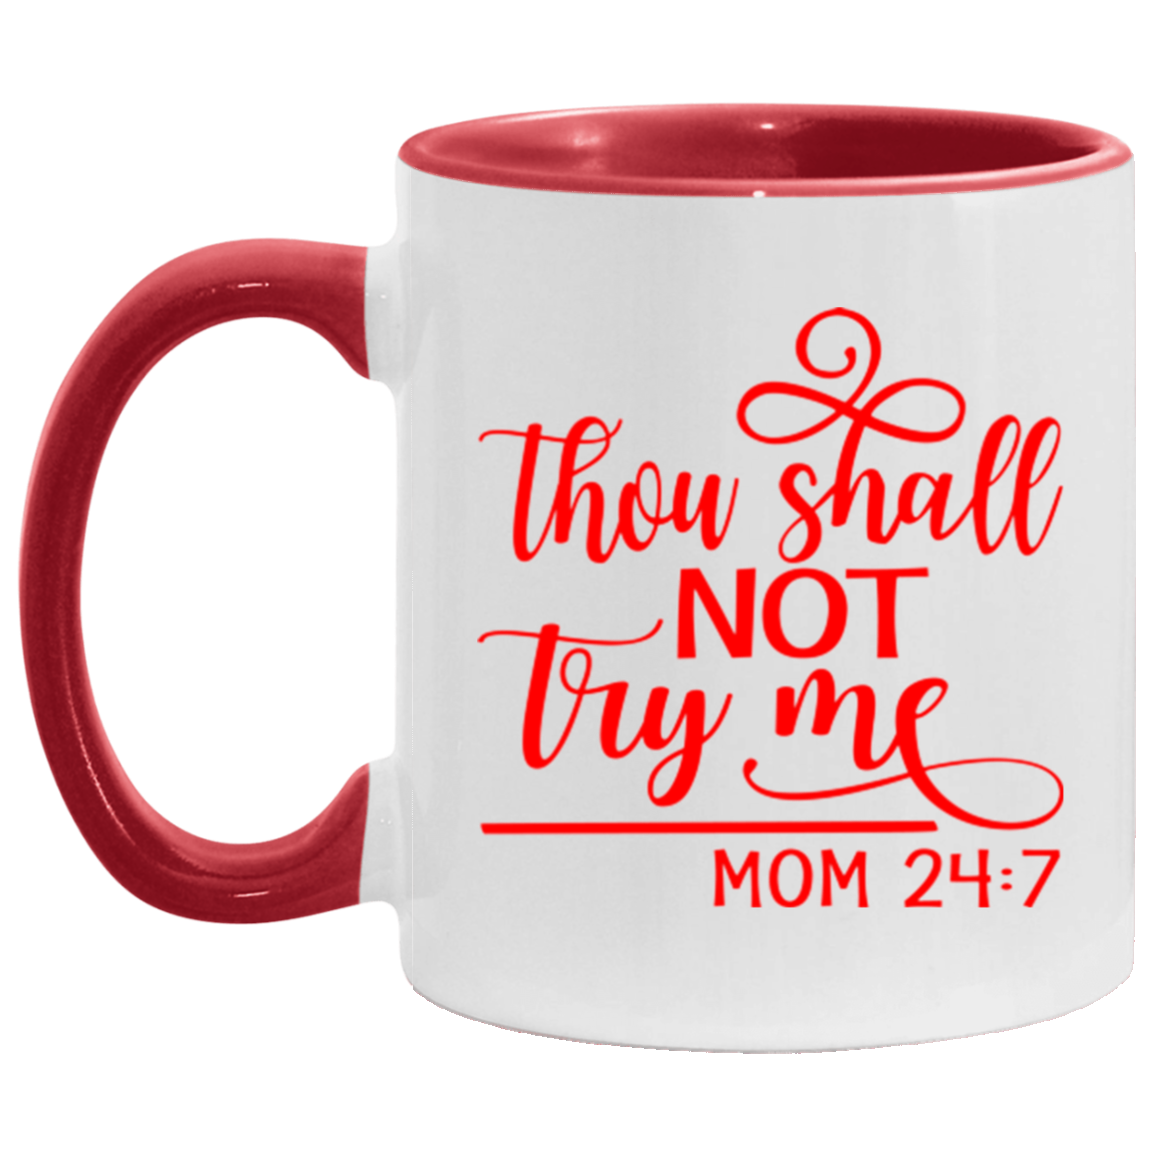 AM11OZ Mom-Don't Try Me Accent Mug